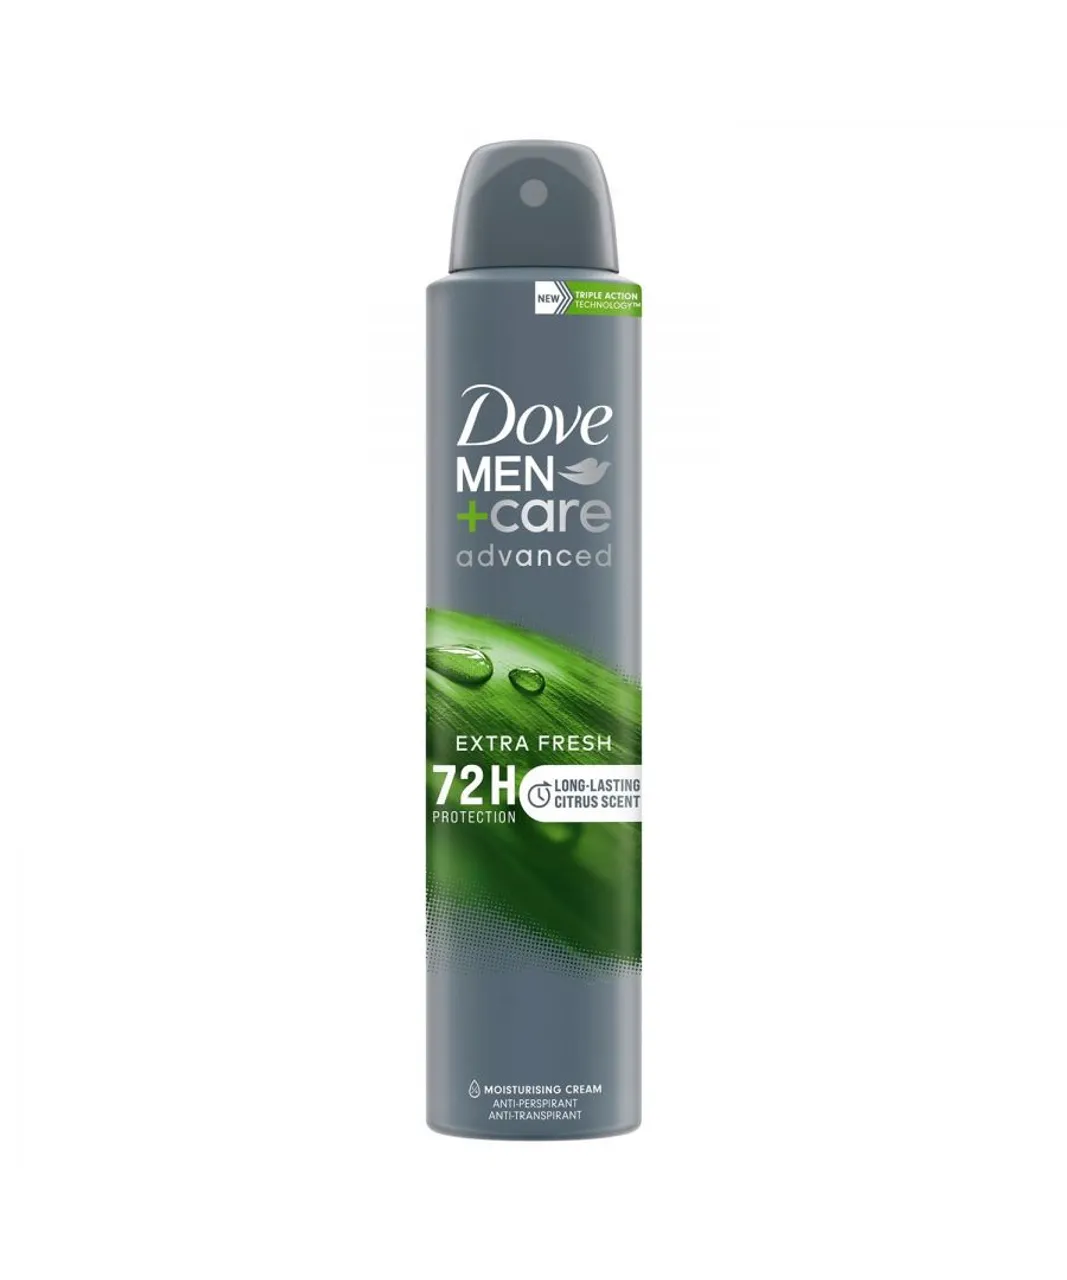 Dove Mens Anti-Perspirant Men+Care Advanced Extra Fresh 72H Protection Deo, 200ml, 6 Pack - Cream - One Size